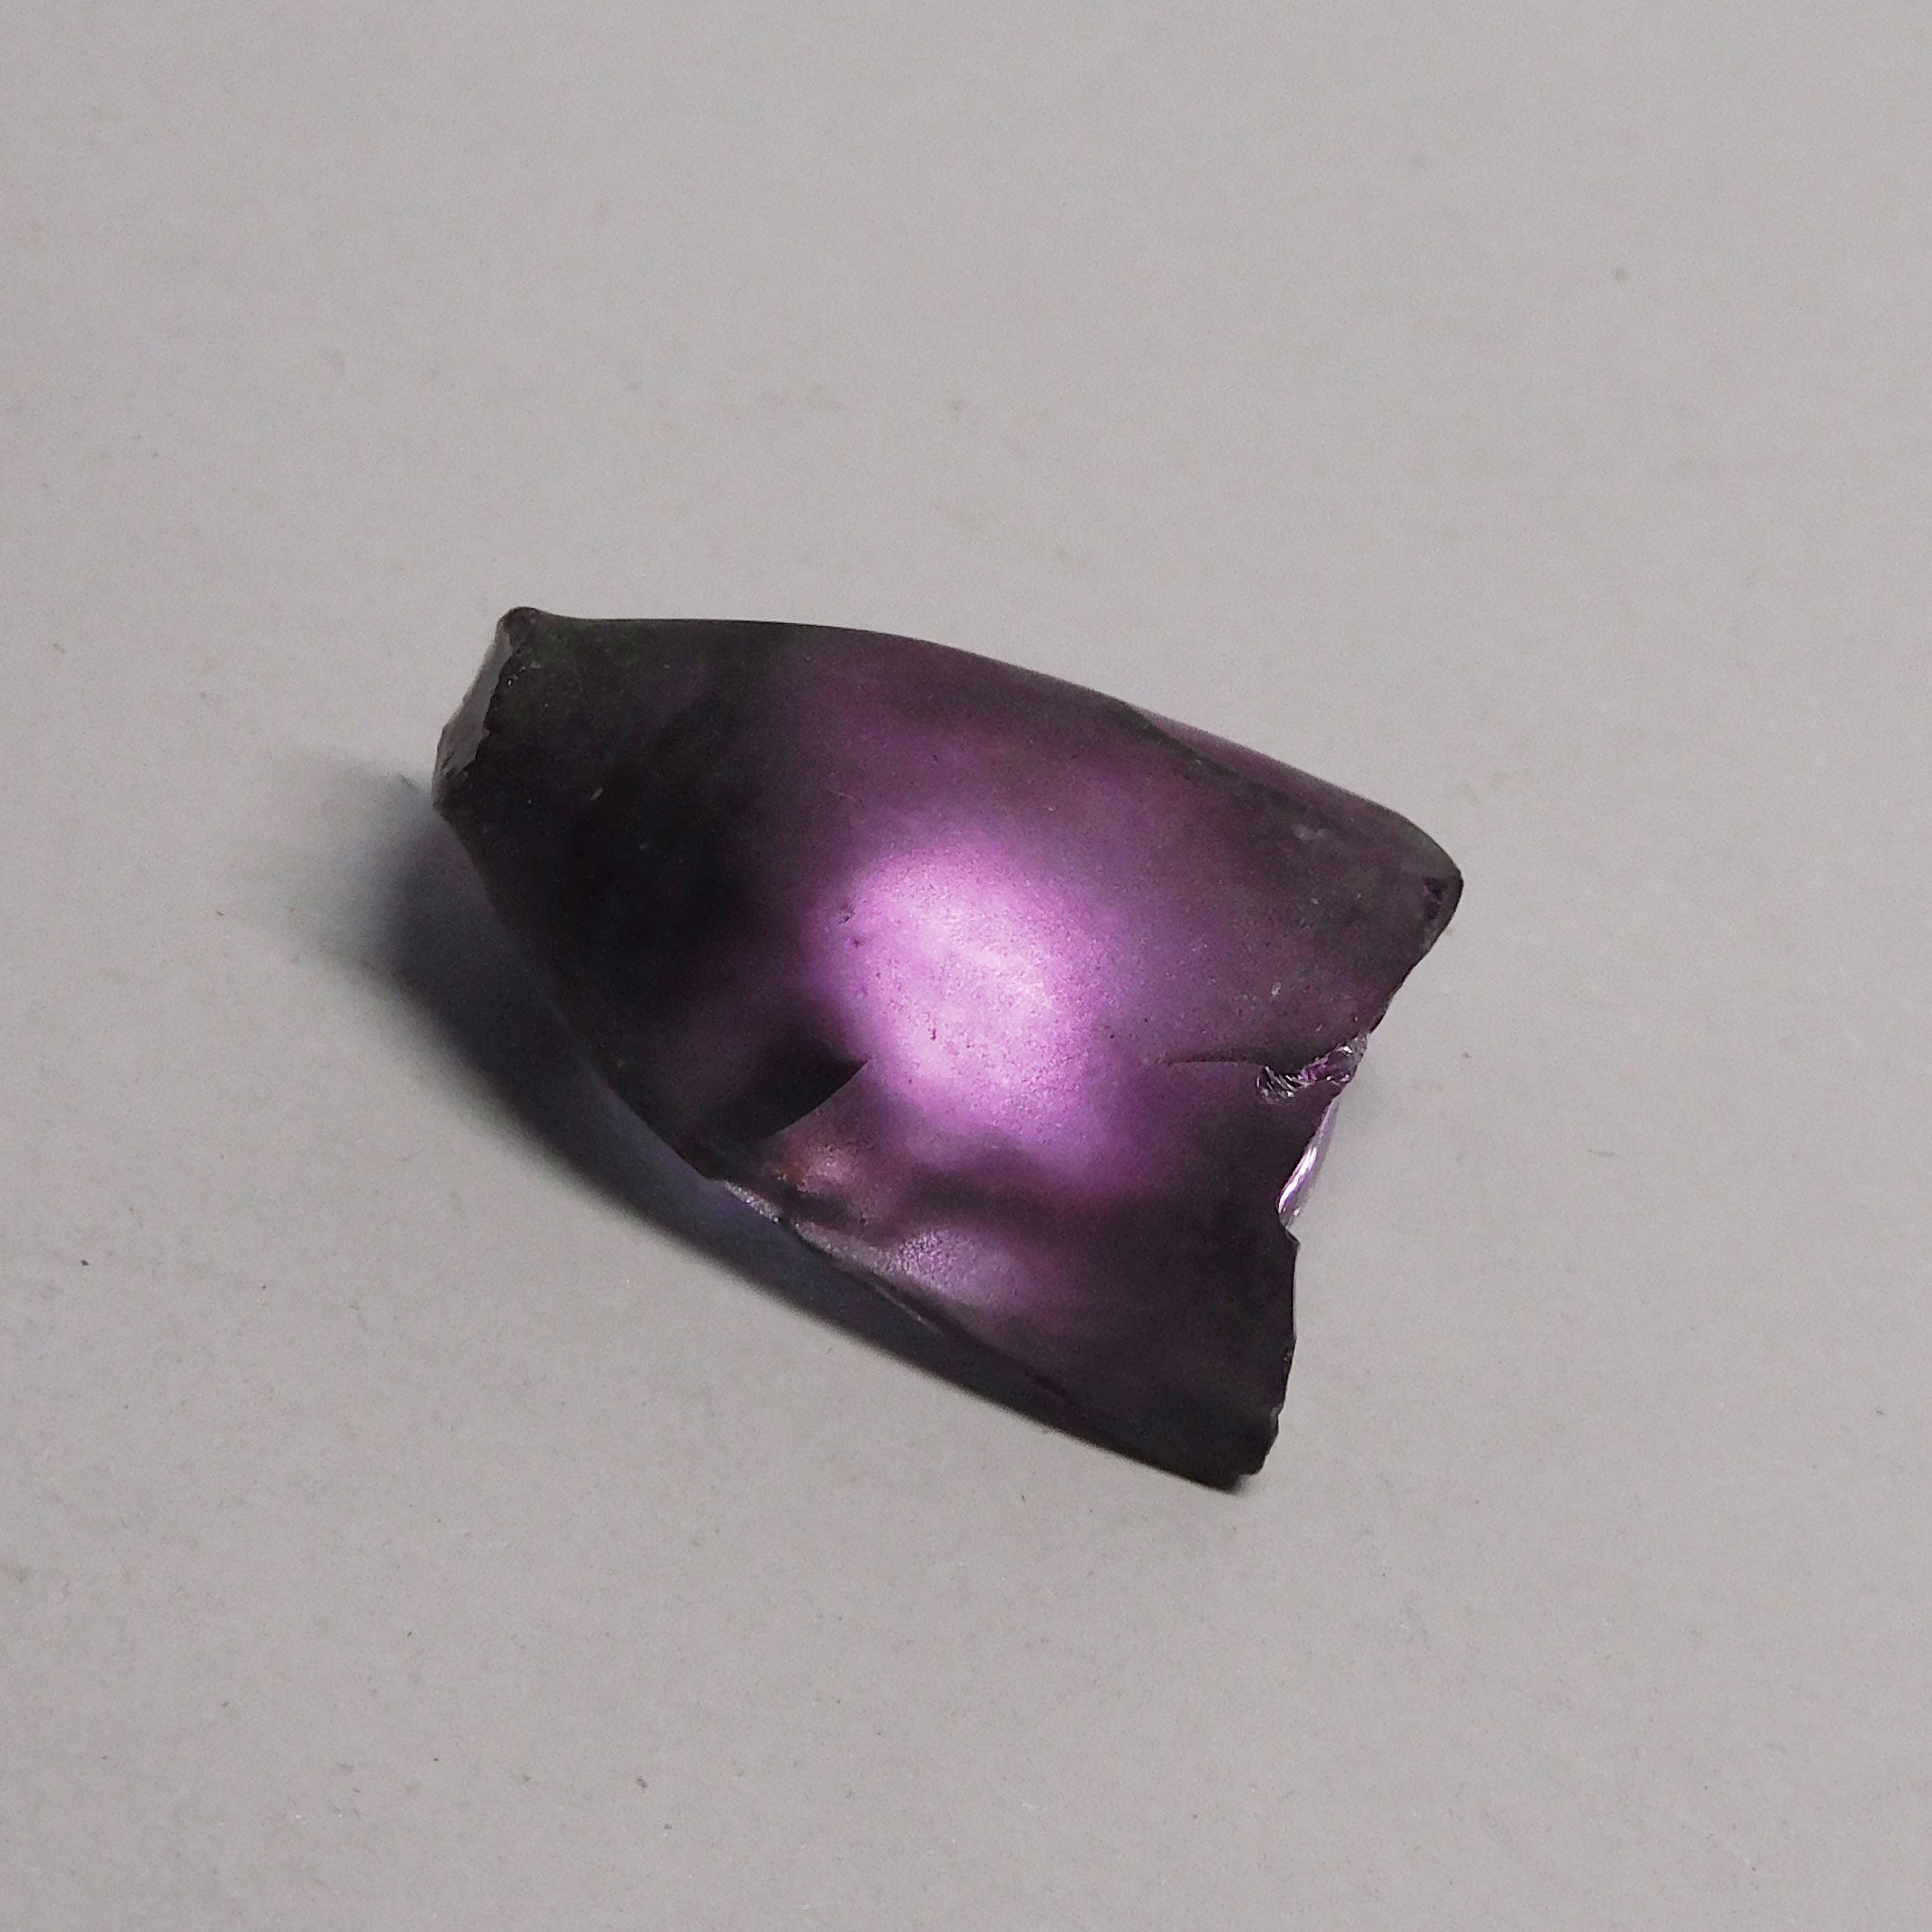 Uncut Rough Natural Color Change Alexandrite 38.70 Carat Loose Gemstone CERTIFIED Mini Cut Rough | Best Offer | Gift For Her/ Him